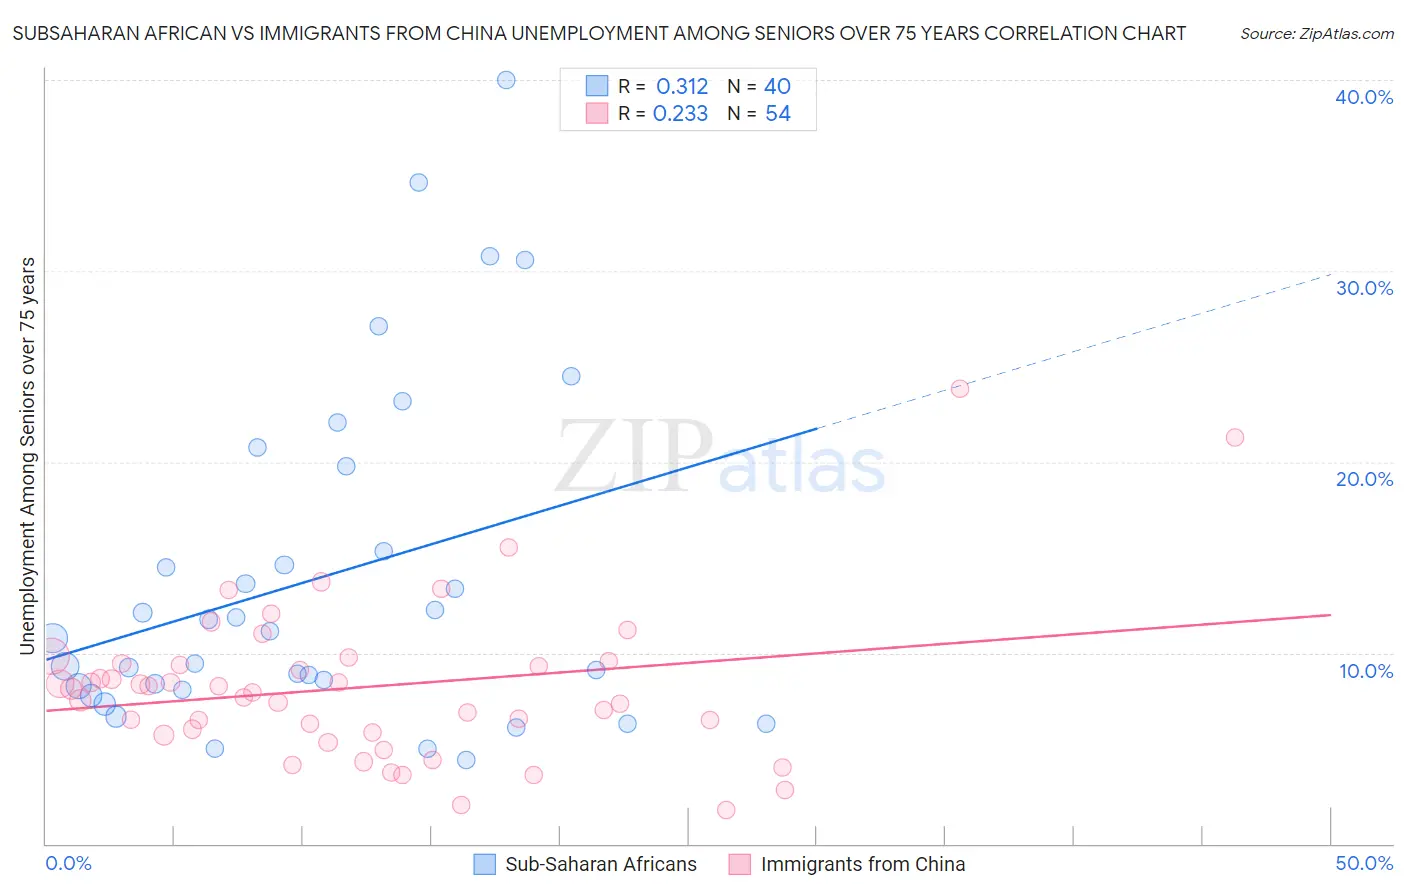 Subsaharan African vs Immigrants from China Unemployment Among Seniors over 75 years